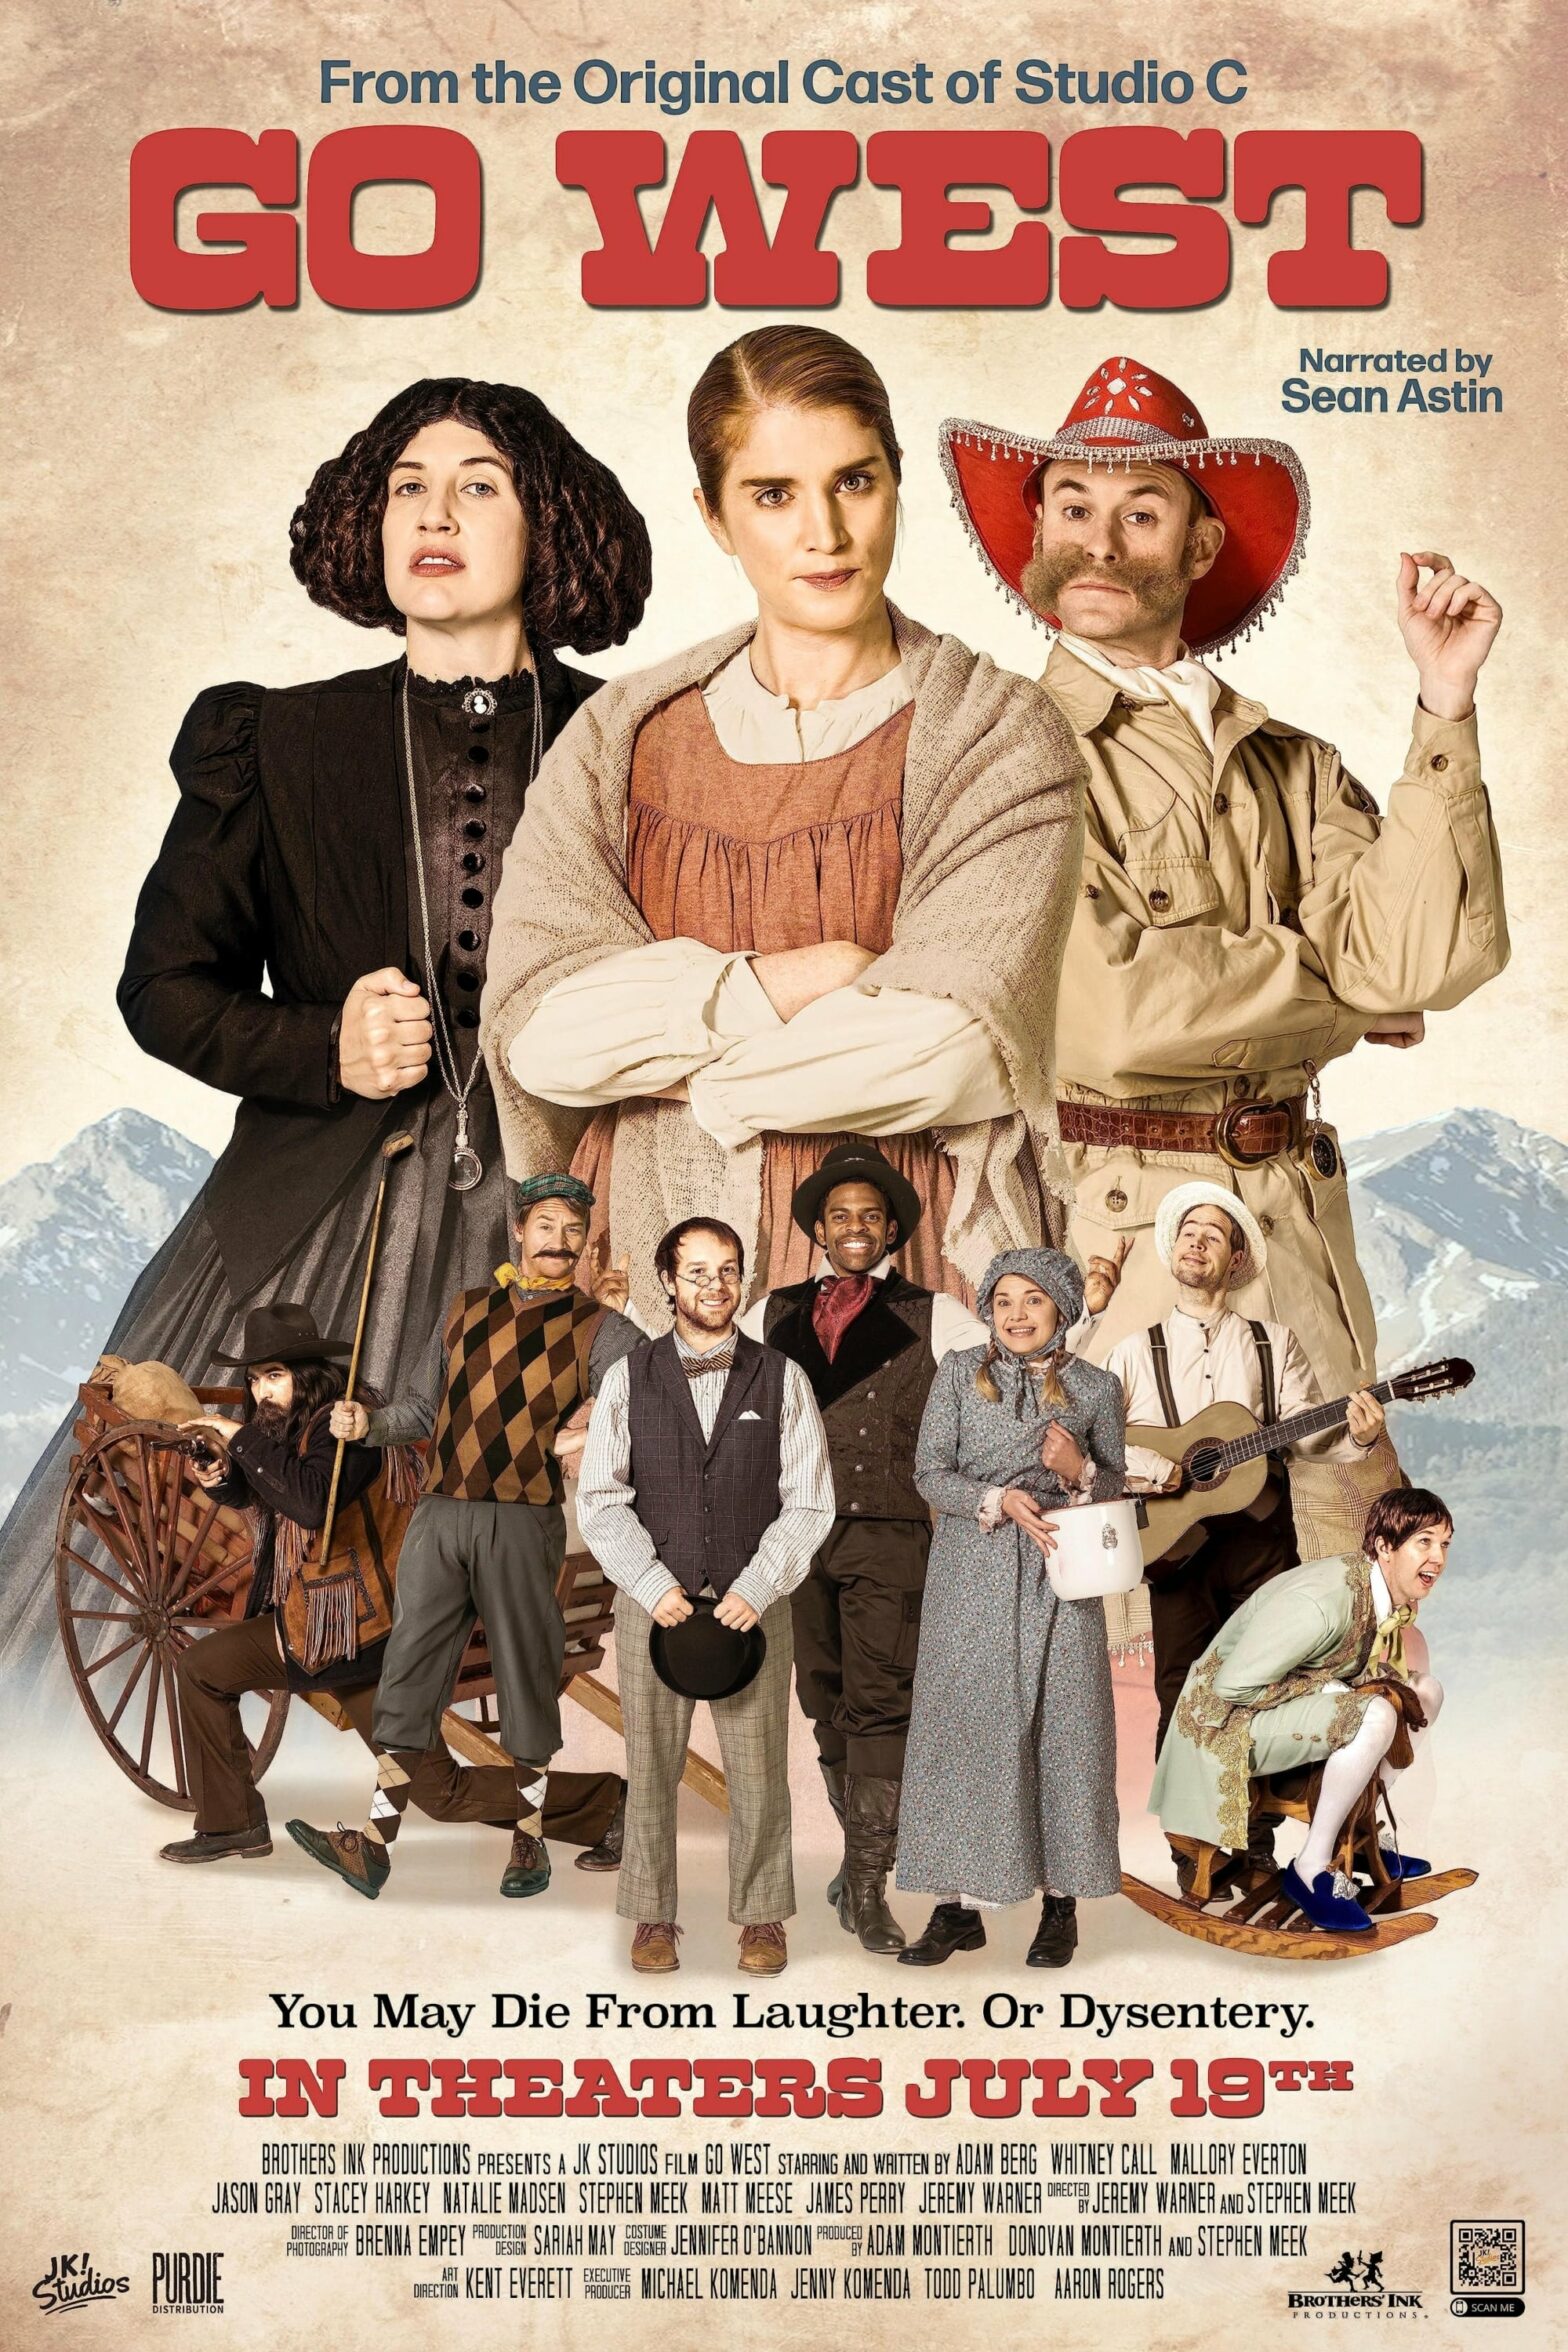 Poster for the movie "Go West"